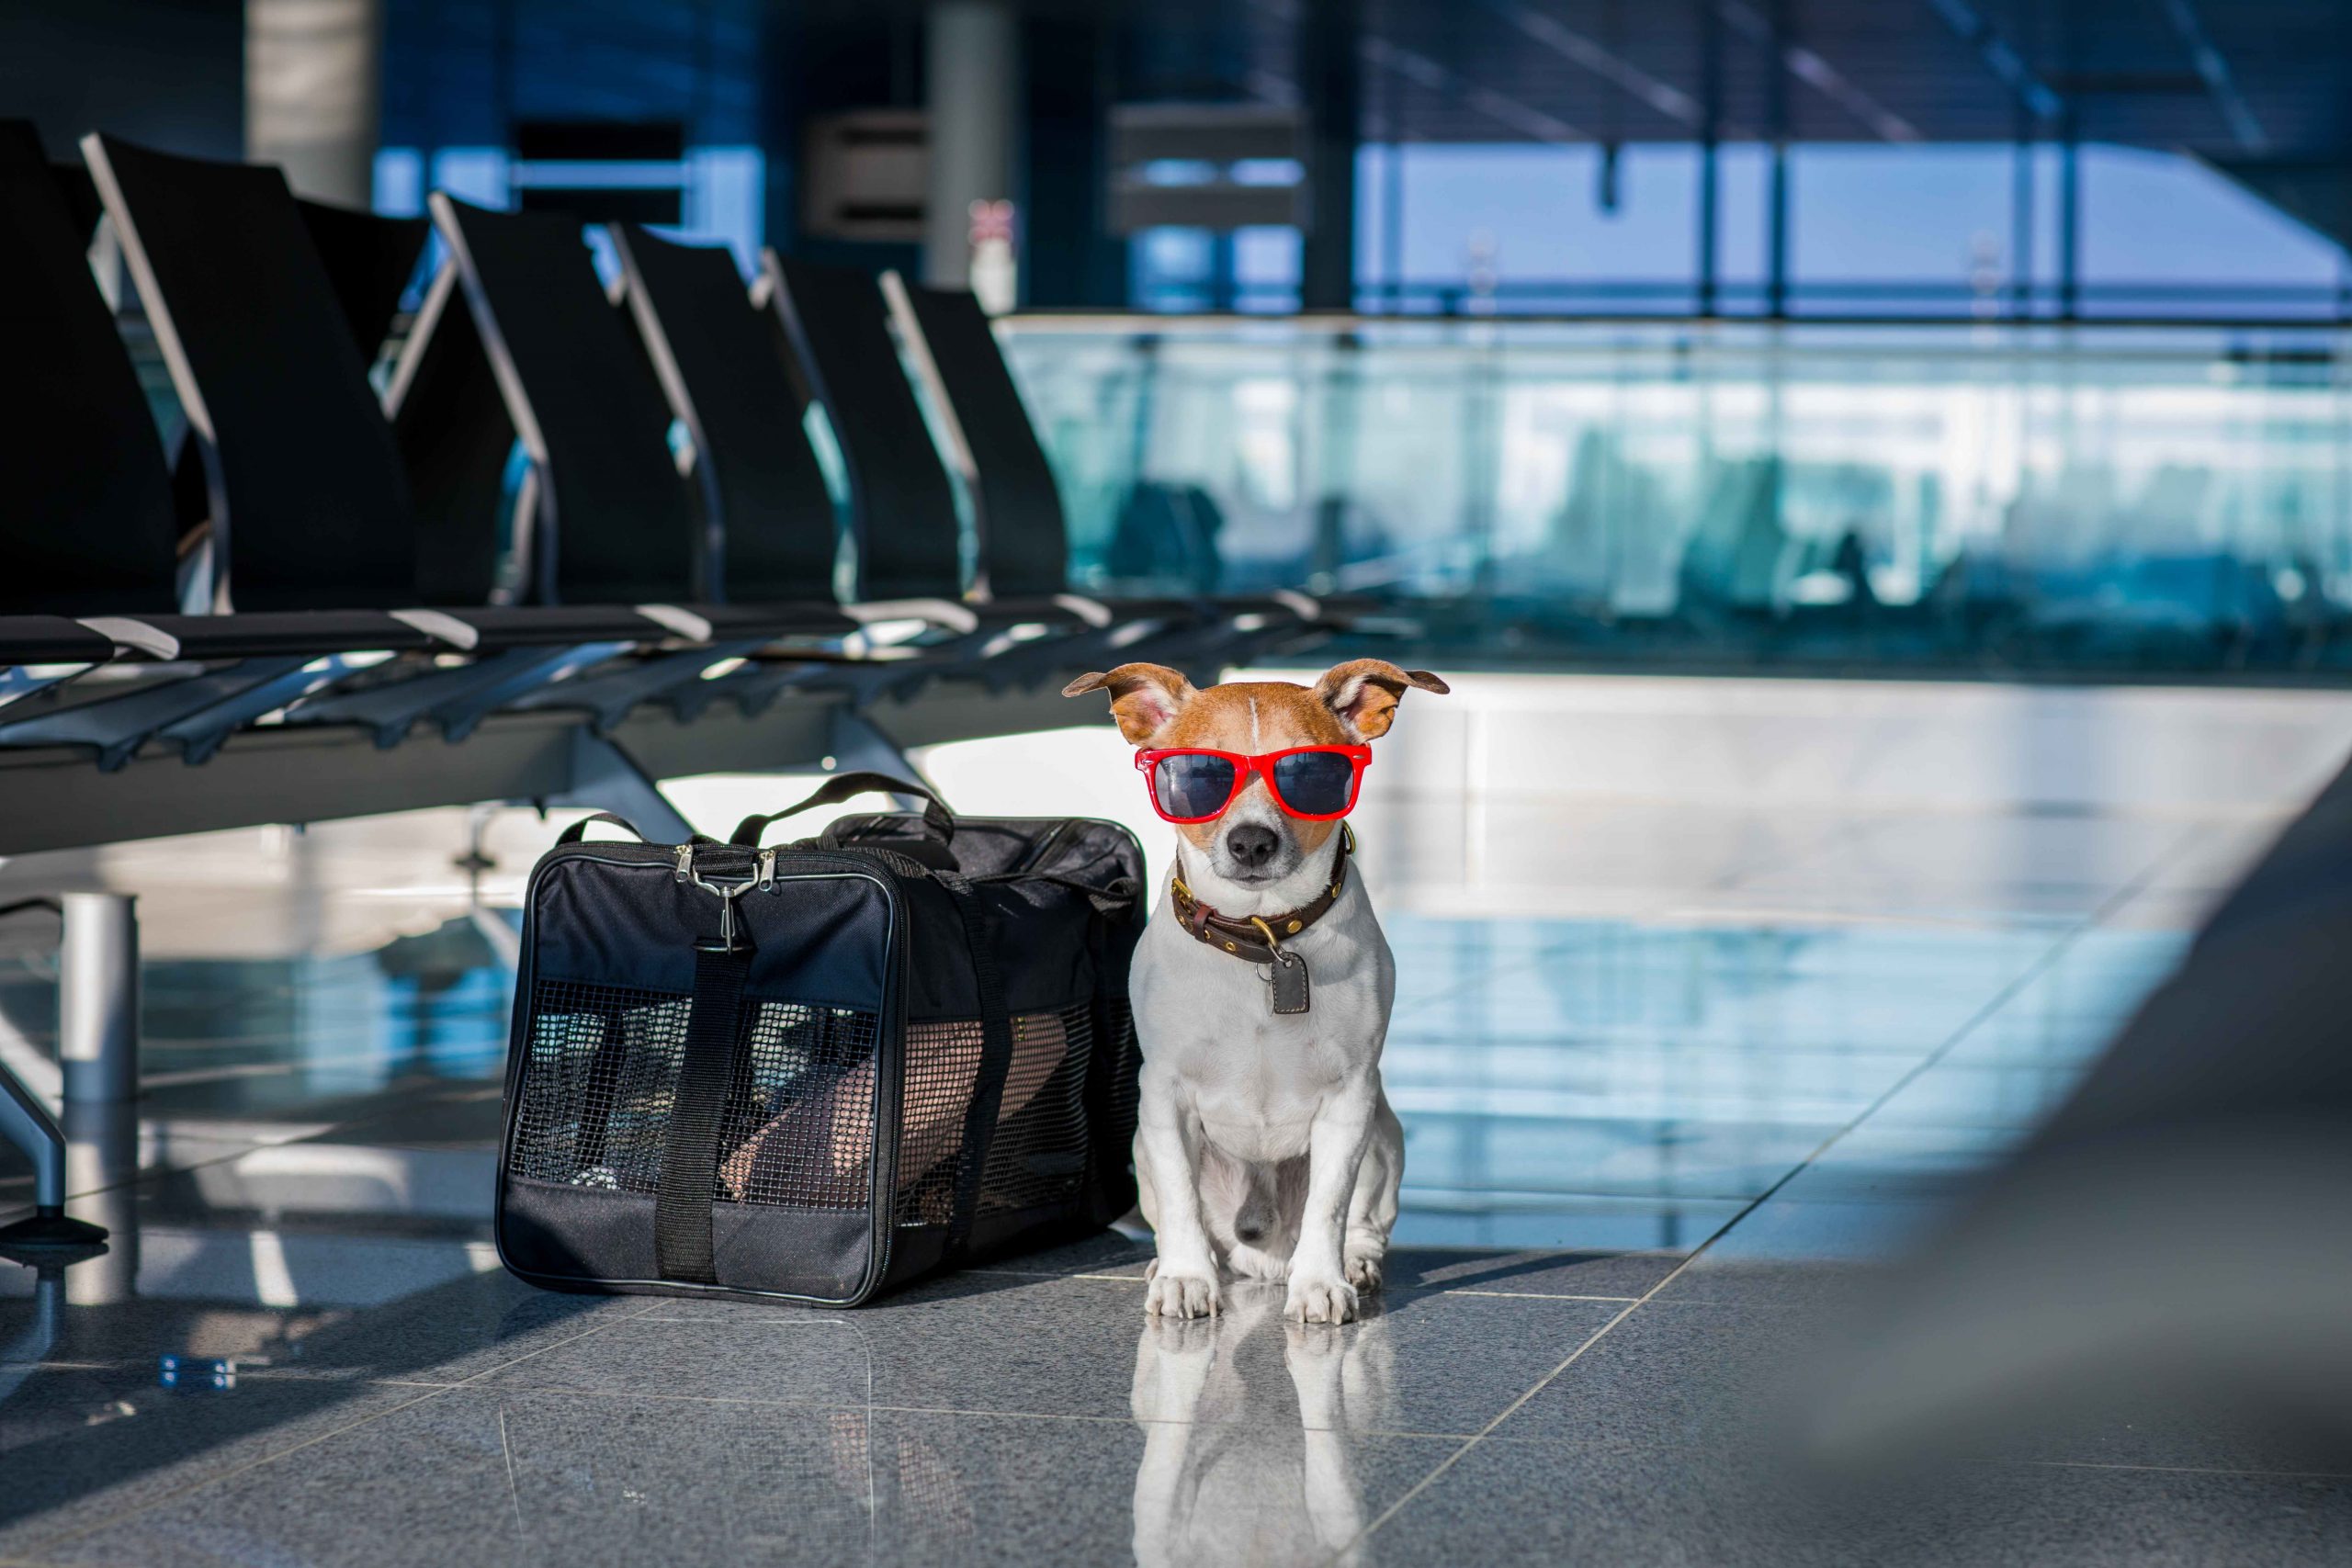 These Dogs Ended Up on a No-Fly List. Their Owners Are Baffled. - WSJ